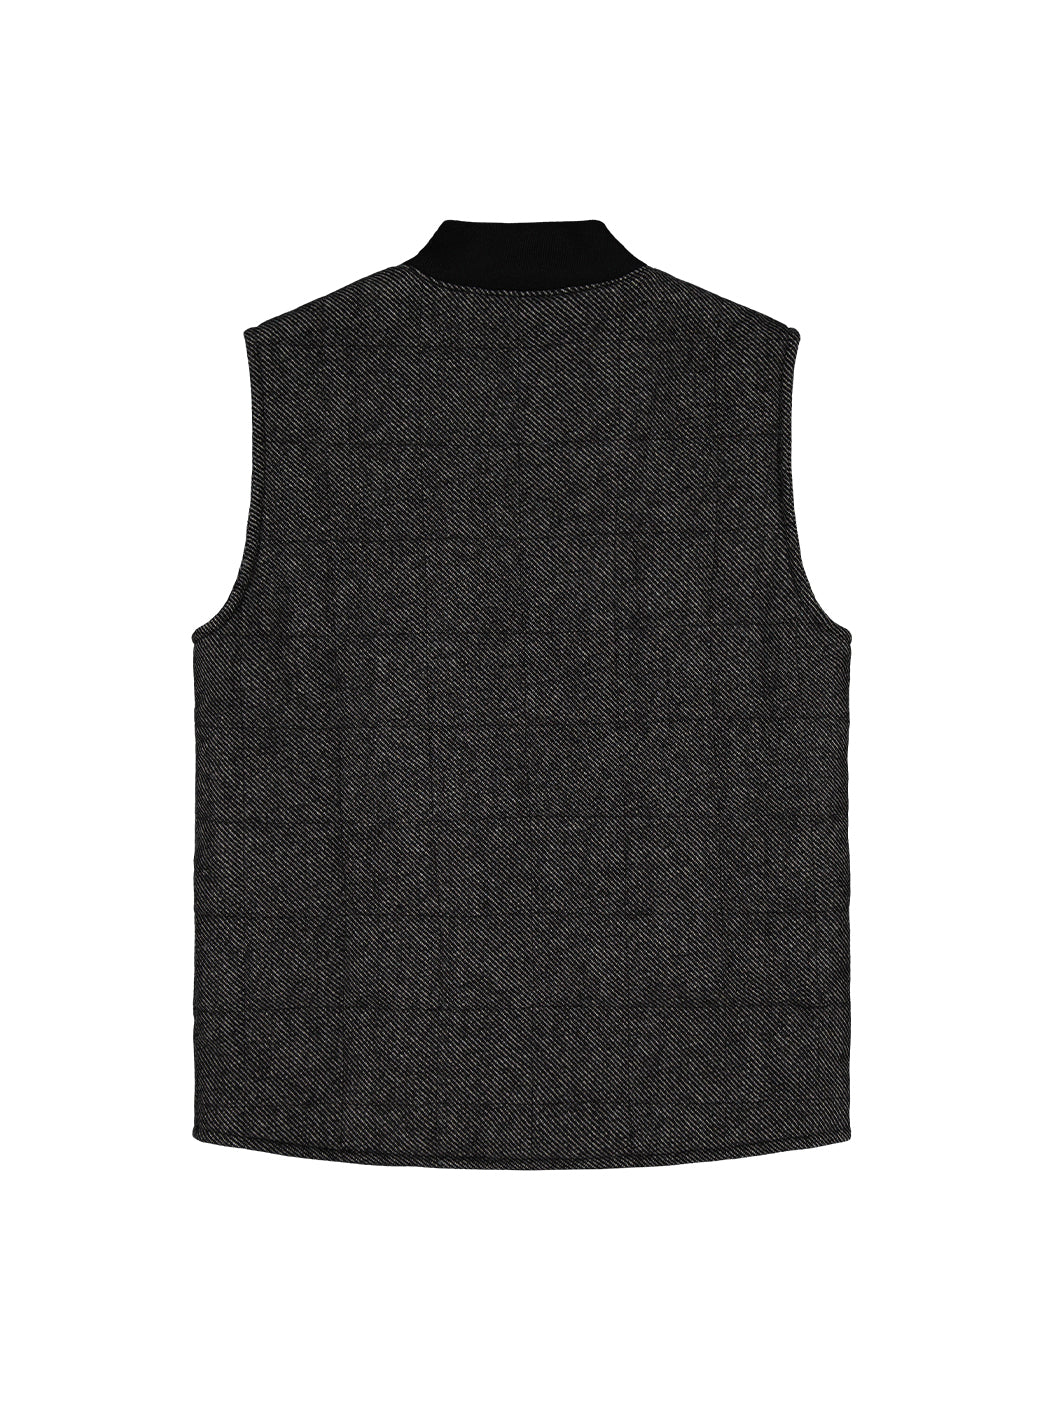 Back image of Quilted Vest in Charcoal